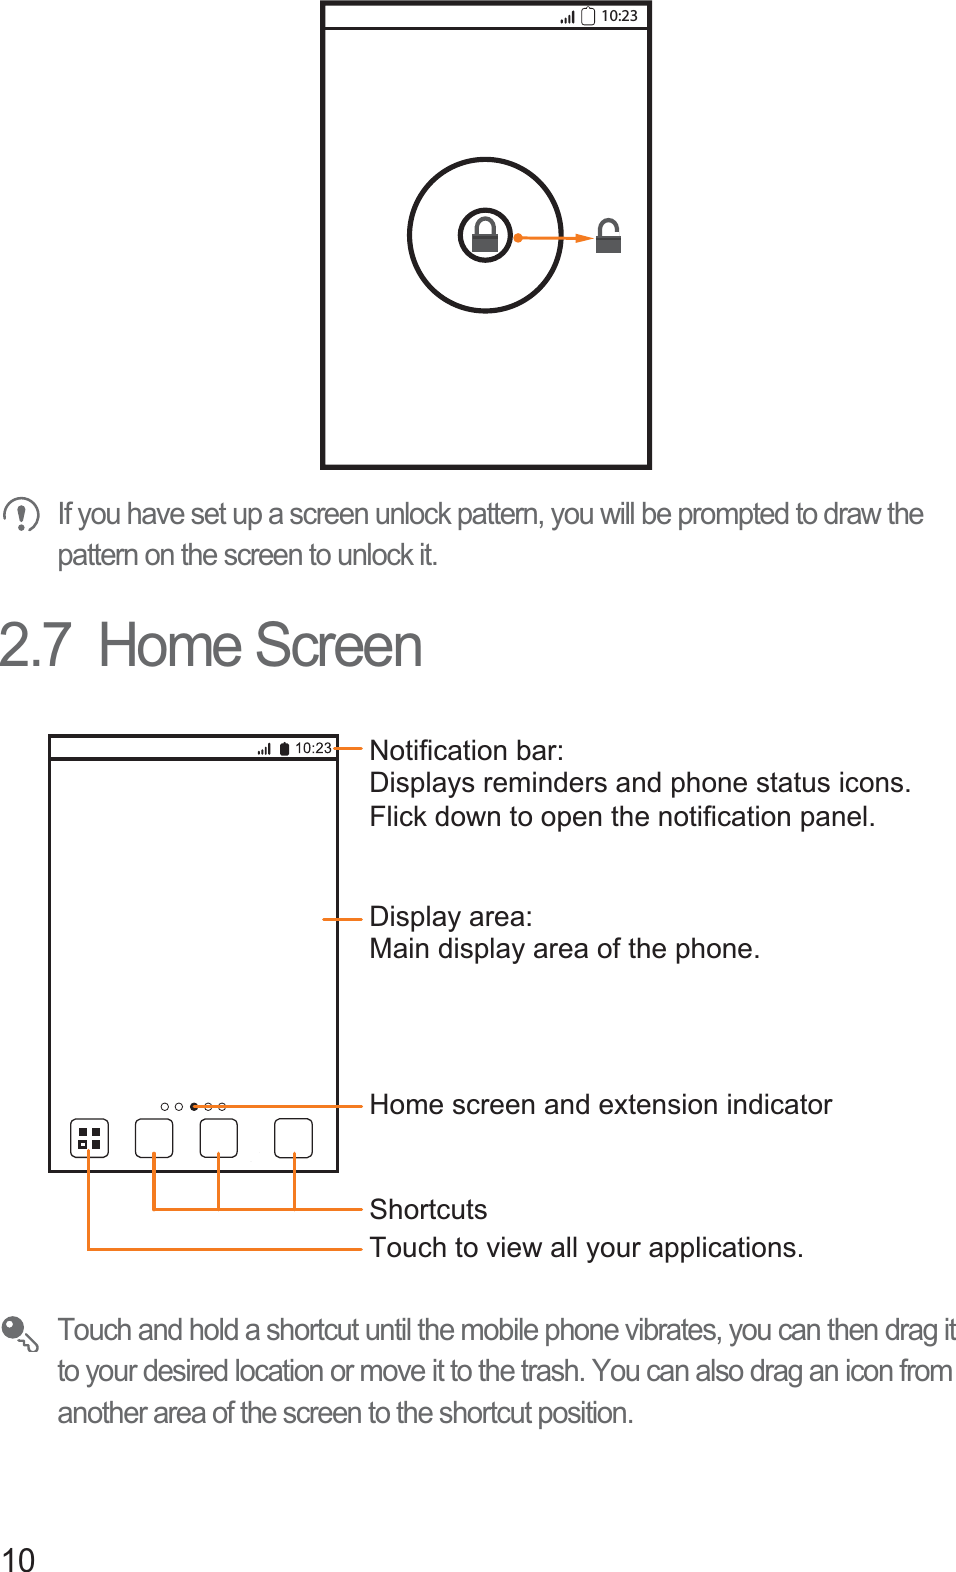 10If you have set up a screen unlock pattern, you will be prompted to draw the pattern on the screen to unlock it.2.7  Home ScreenTouch and hold a shortcut until the mobile phone vibrates, you can then drag it to your desired location or move it to the trash. You can also drag an icon from another area of the screen to the shortcut position.10:23Touch to view all your applications.ShortcutsNotification bar:Displays reminders and phone status icons. Flick down to open the notification panel. Display area: Main display area of the phone.Home screen and extension indicator